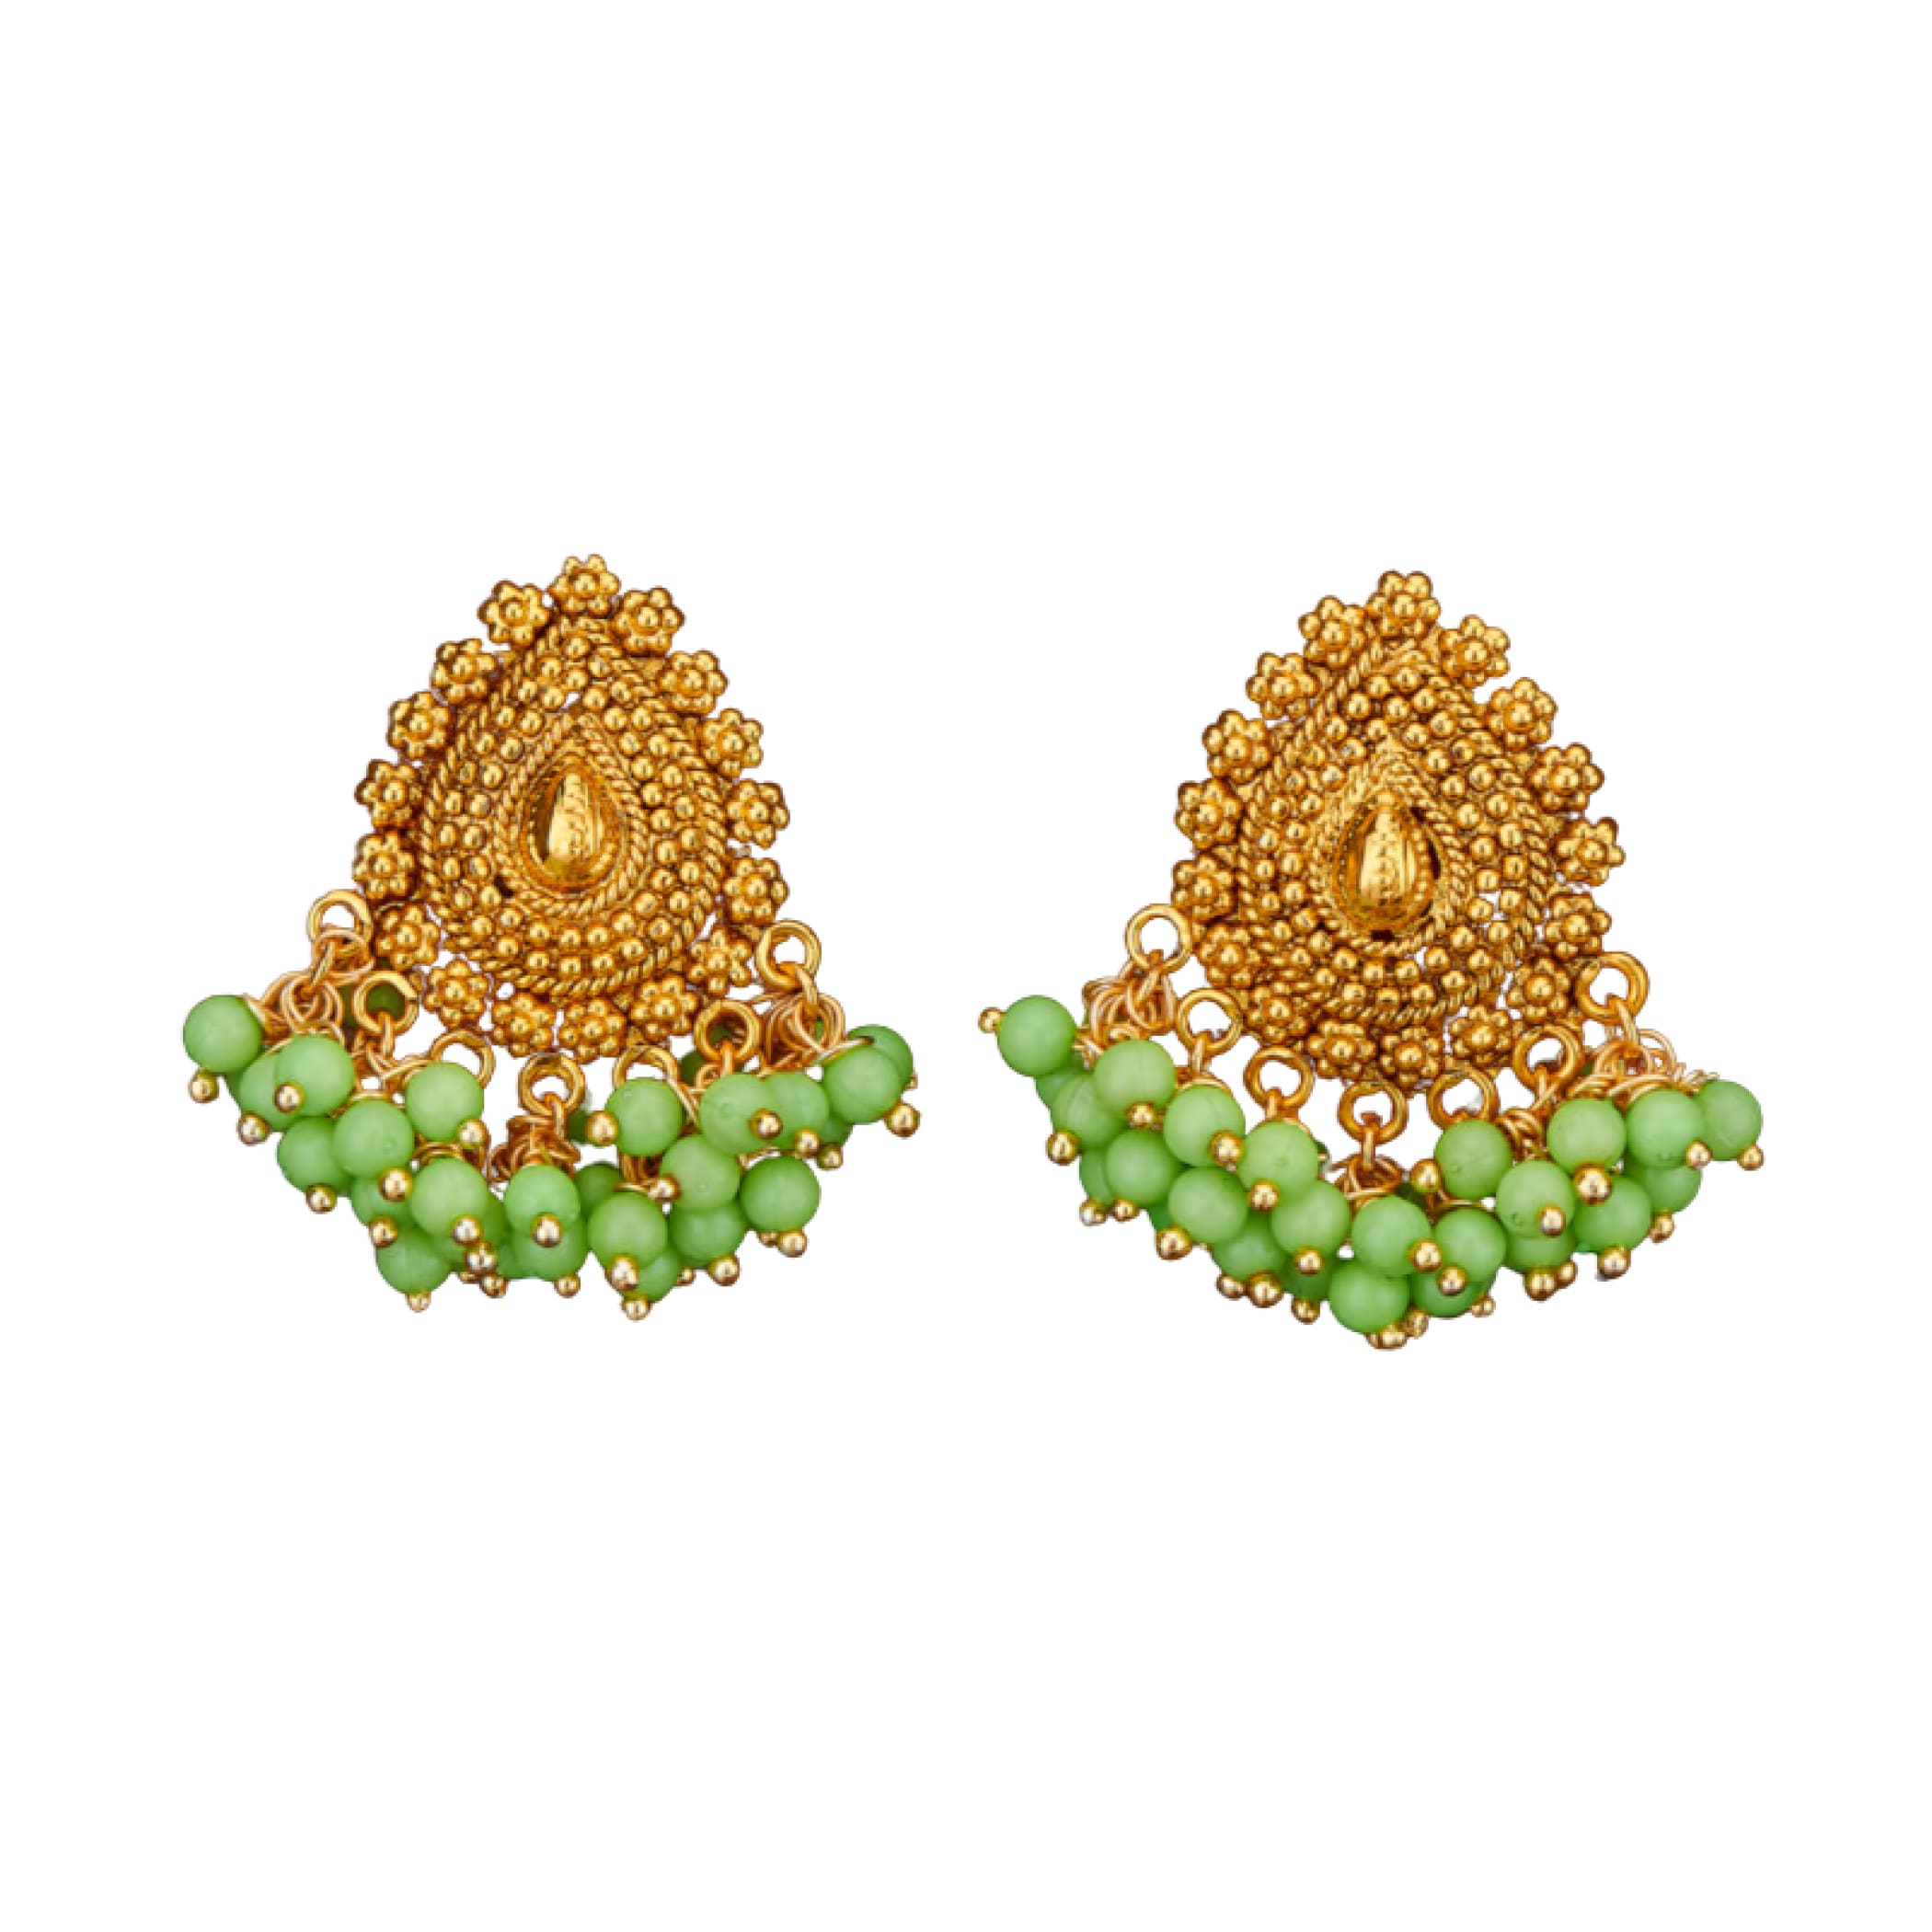 Indian earrings ethnic bollywood traditional south jewelry